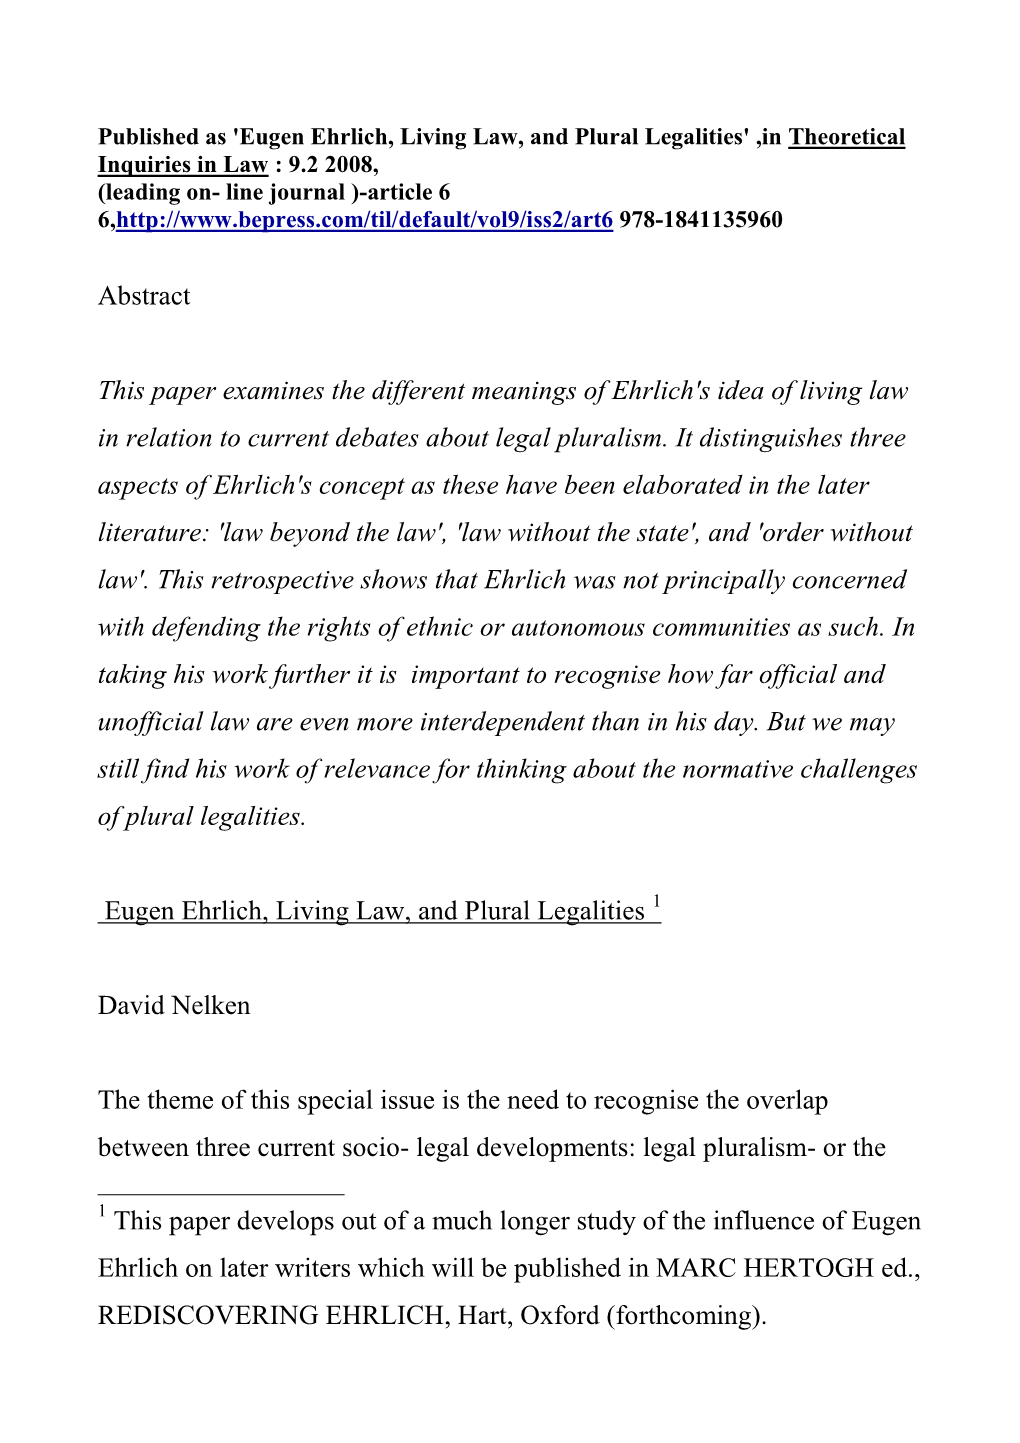 Abstract This Paper Examines the Different Meanings of Ehrlich's Idea